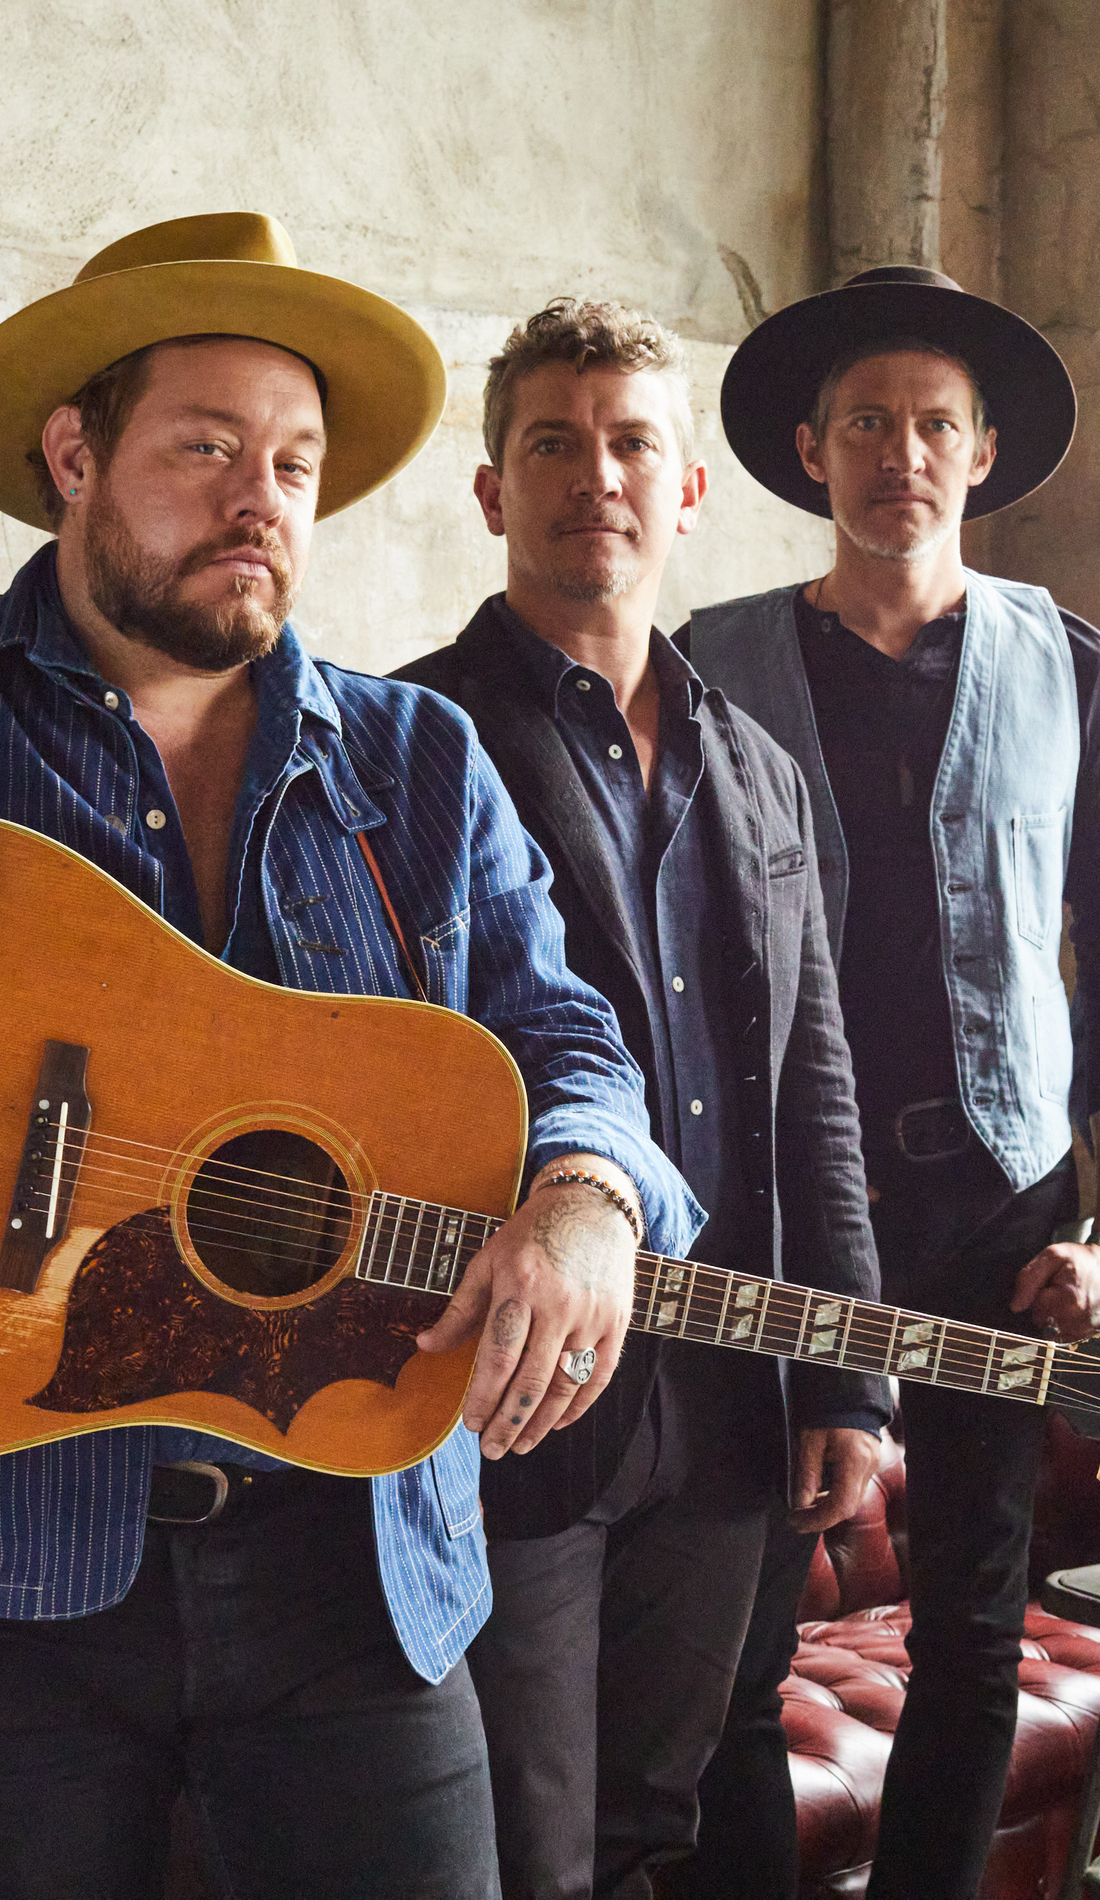 A Nathaniel Rateliff & The Night Sweats live event